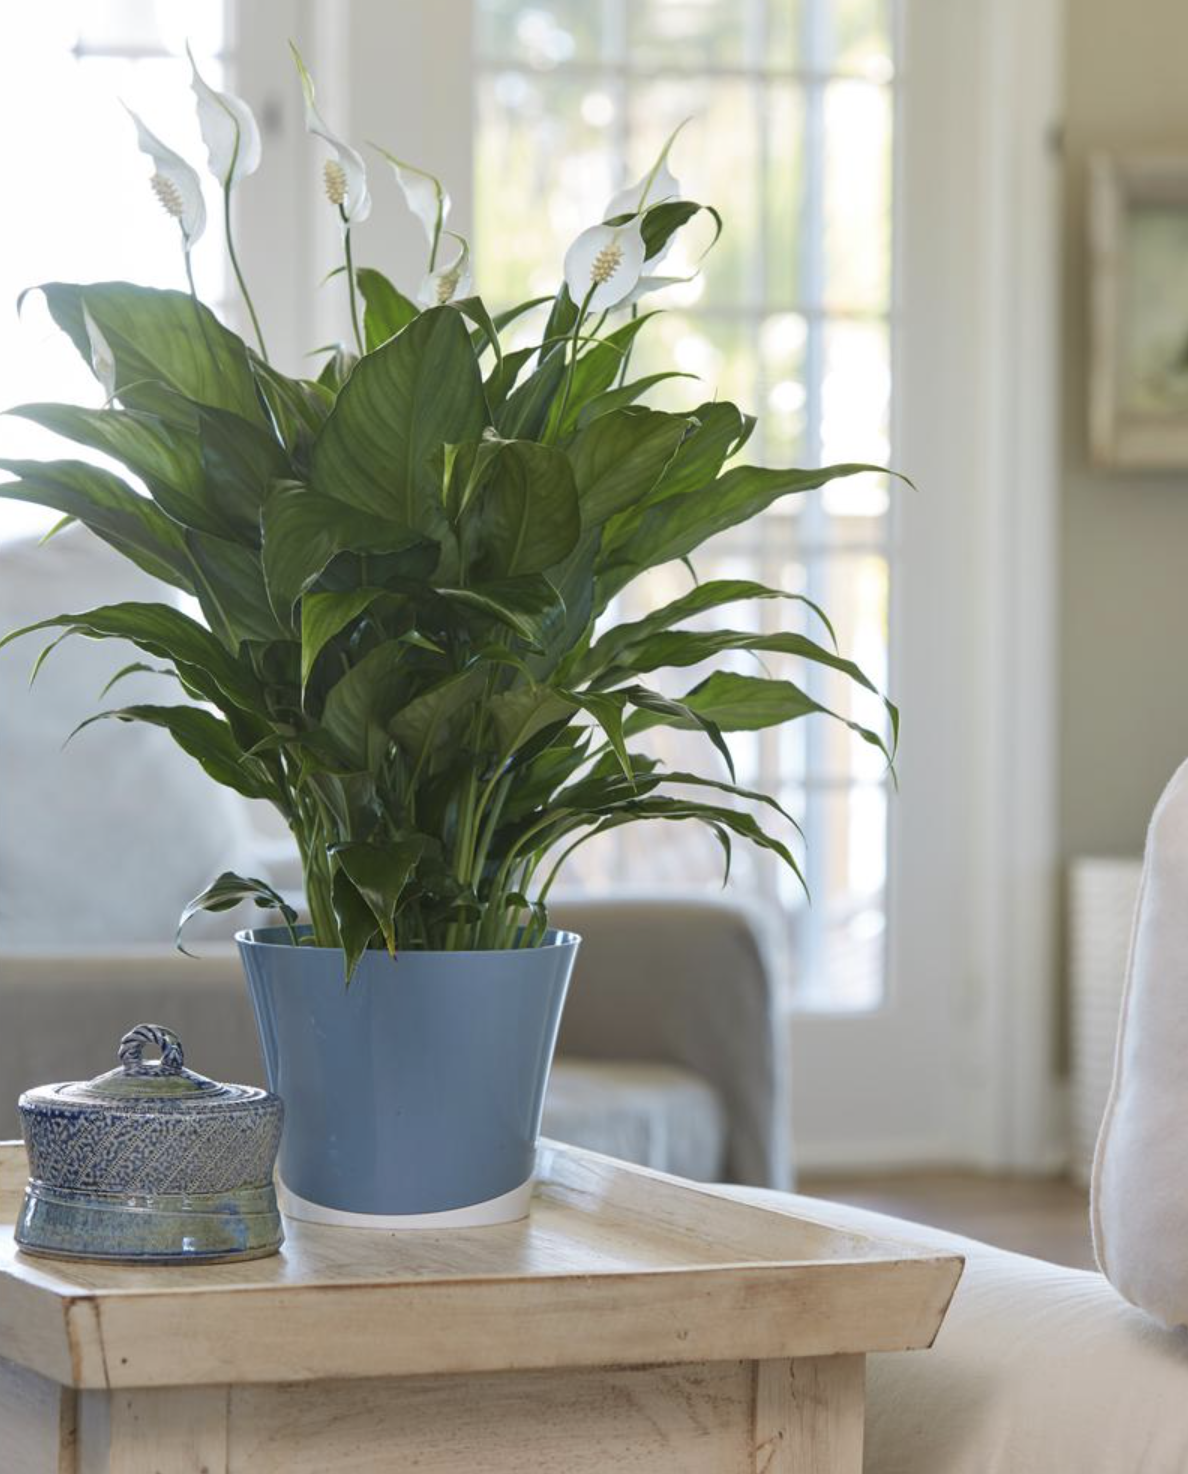 8 Air Purifying Plants That Are Almost Impossible To Kill And Look Great In Any Home